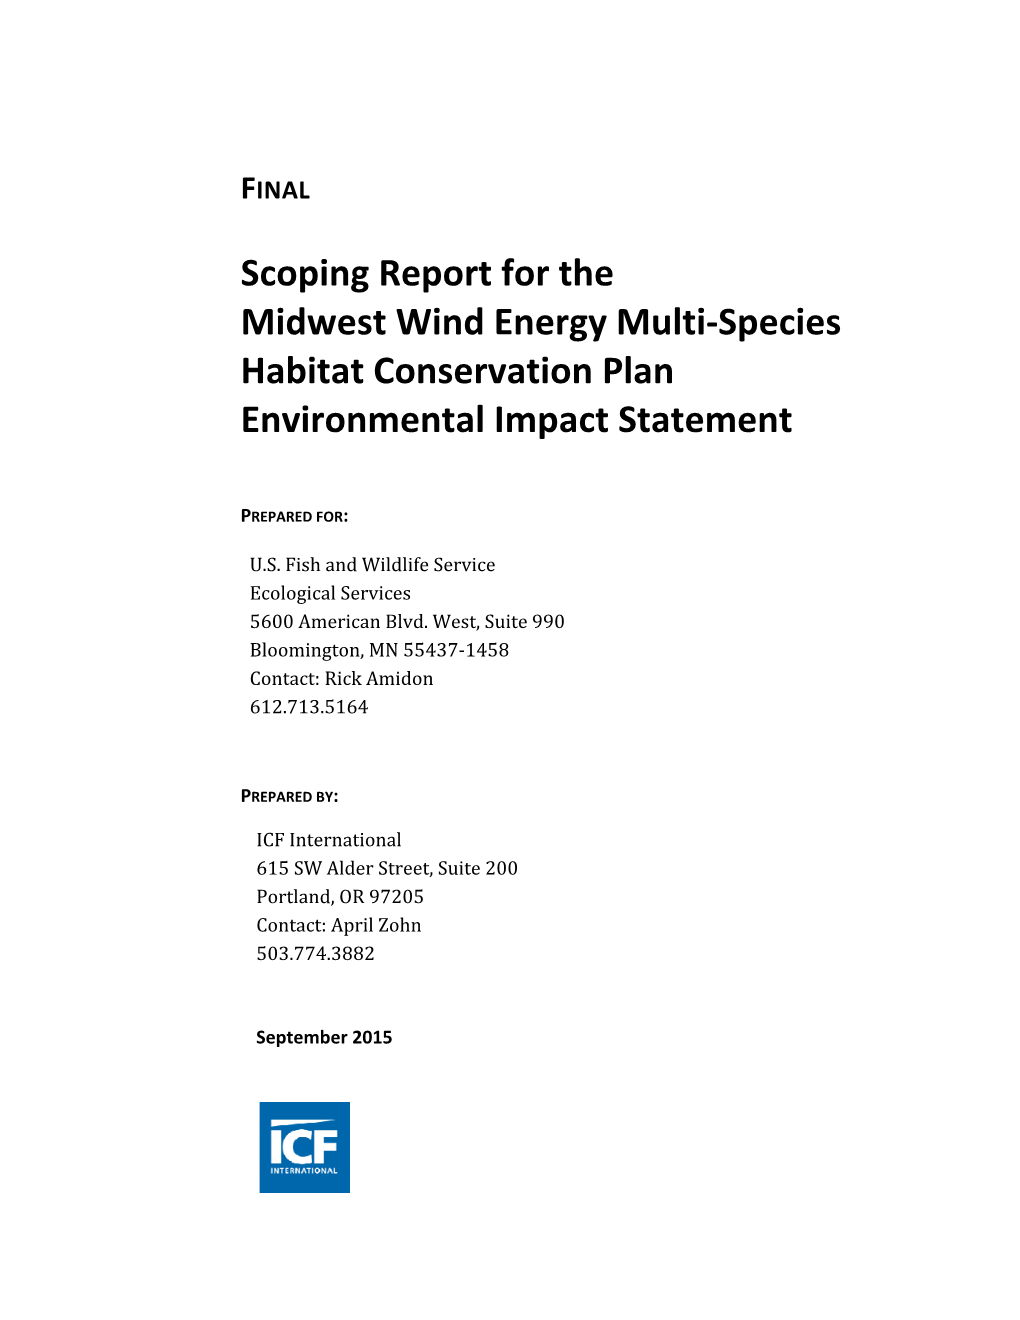 Scoping Report for the Midwest Wind Energy Multi-Species Habitat